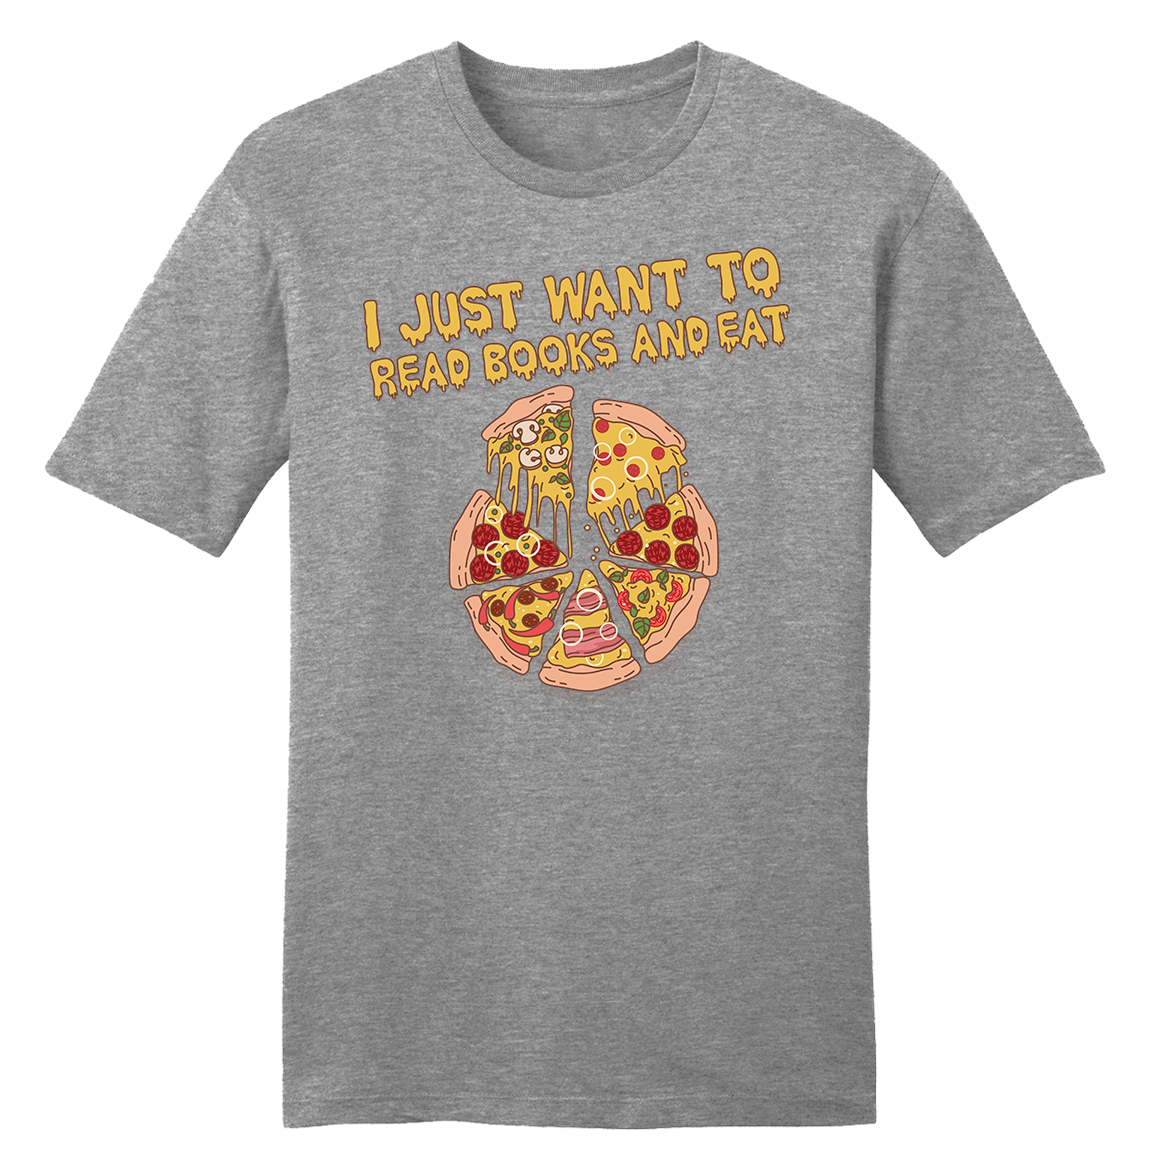 I Just Want to Read Books and Eat Pizza Tee